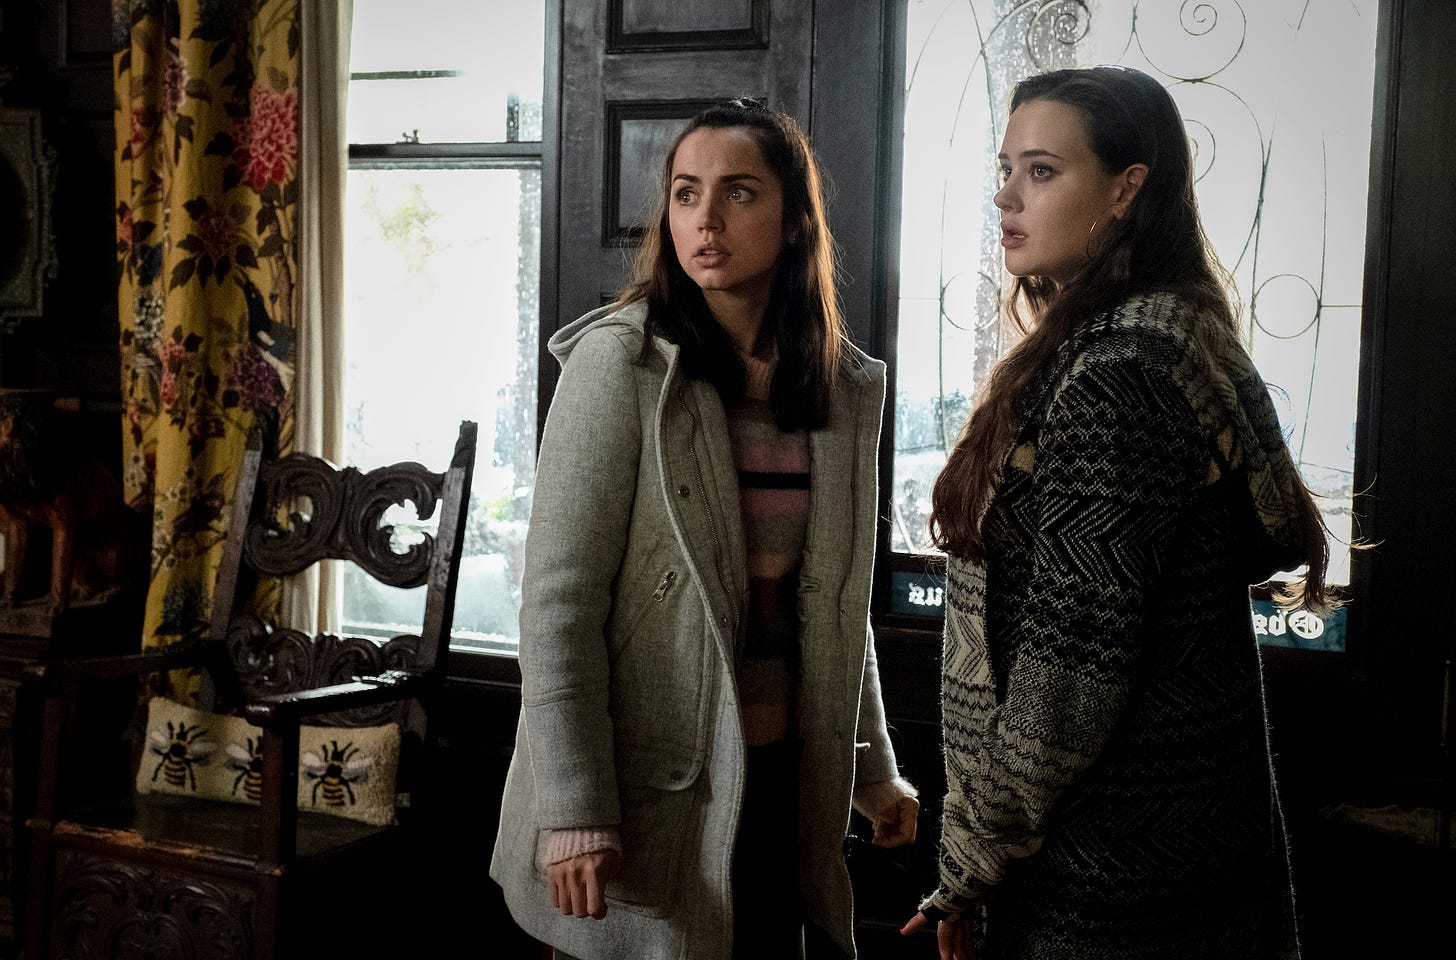 Ana de Armas as Marta Cabrera (left) and Katherine Langford as Meg Thrombey (right) in KNIVES OUT.